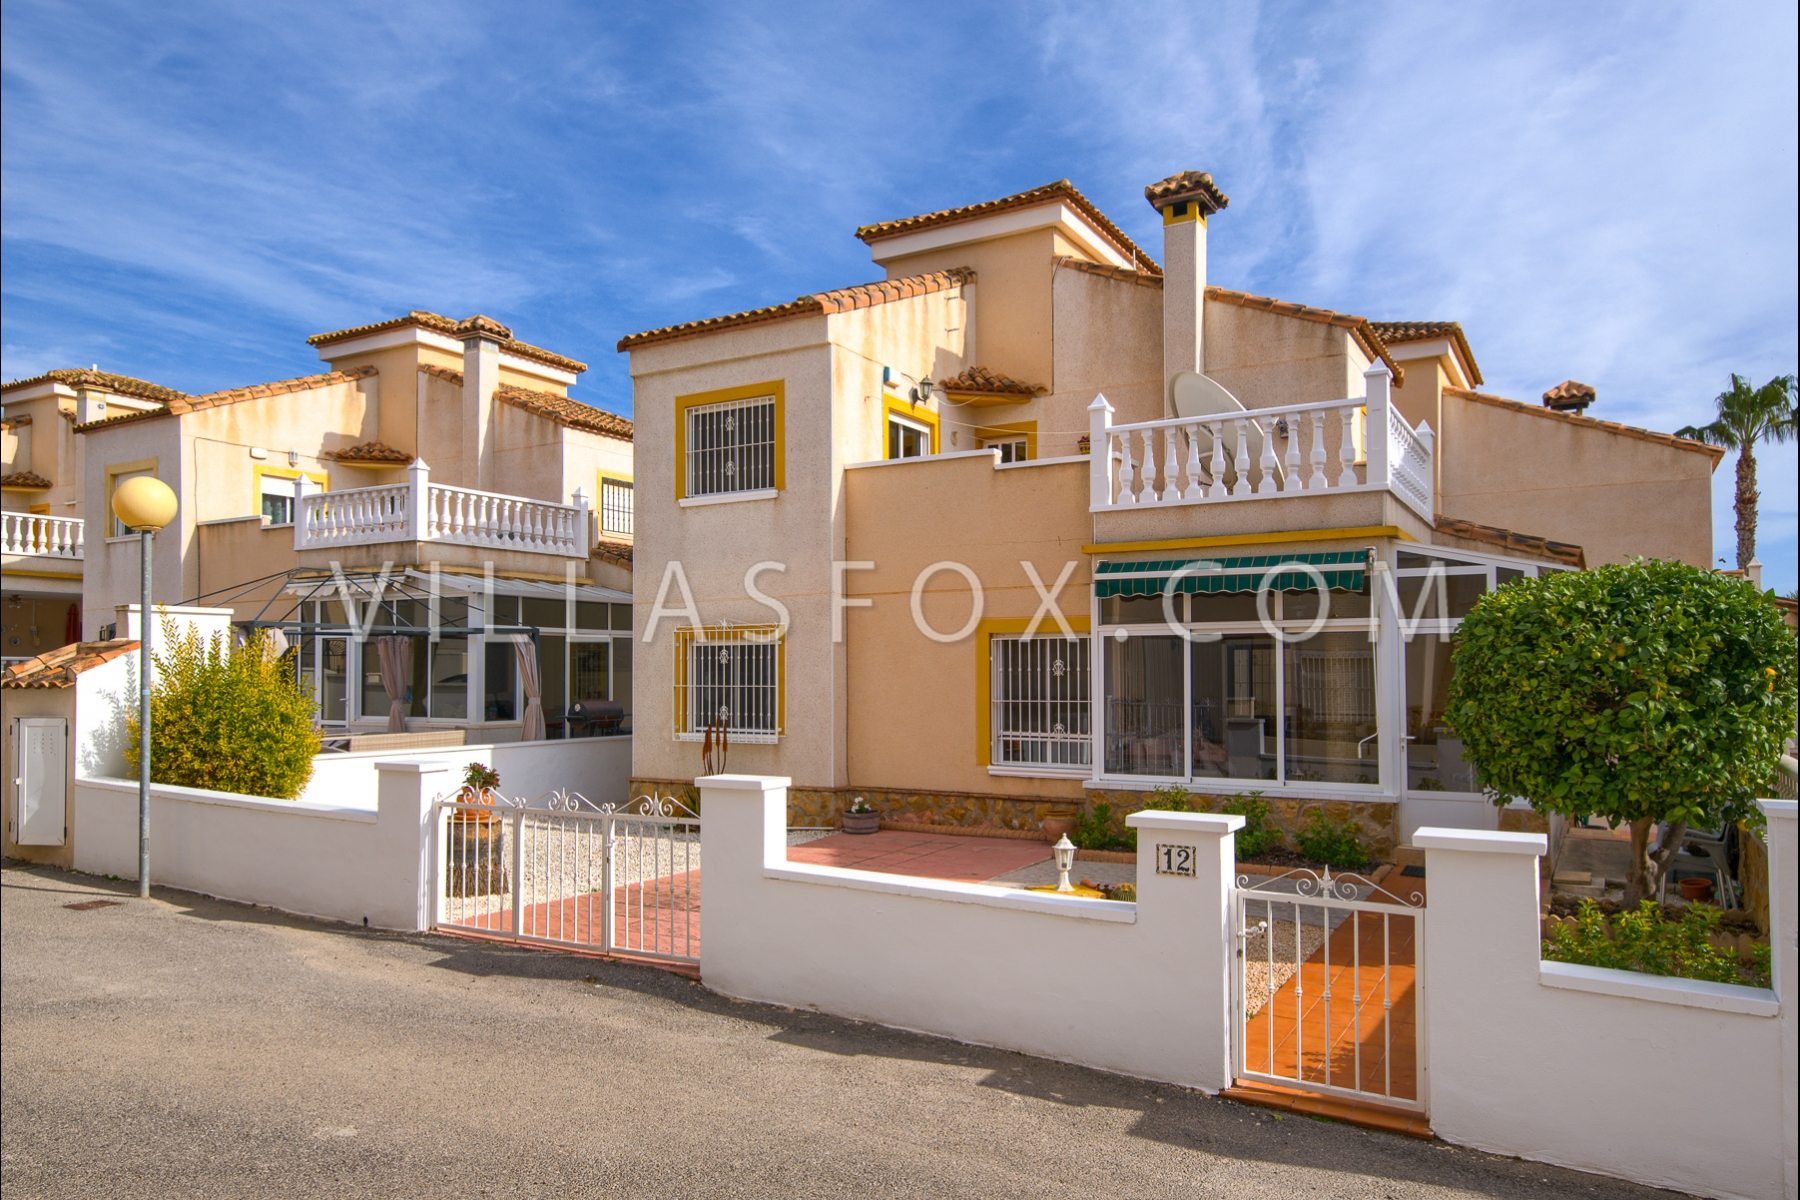 3-bedroom, west-facing independent villa, Lakeview Mansions (Lo Rufete)